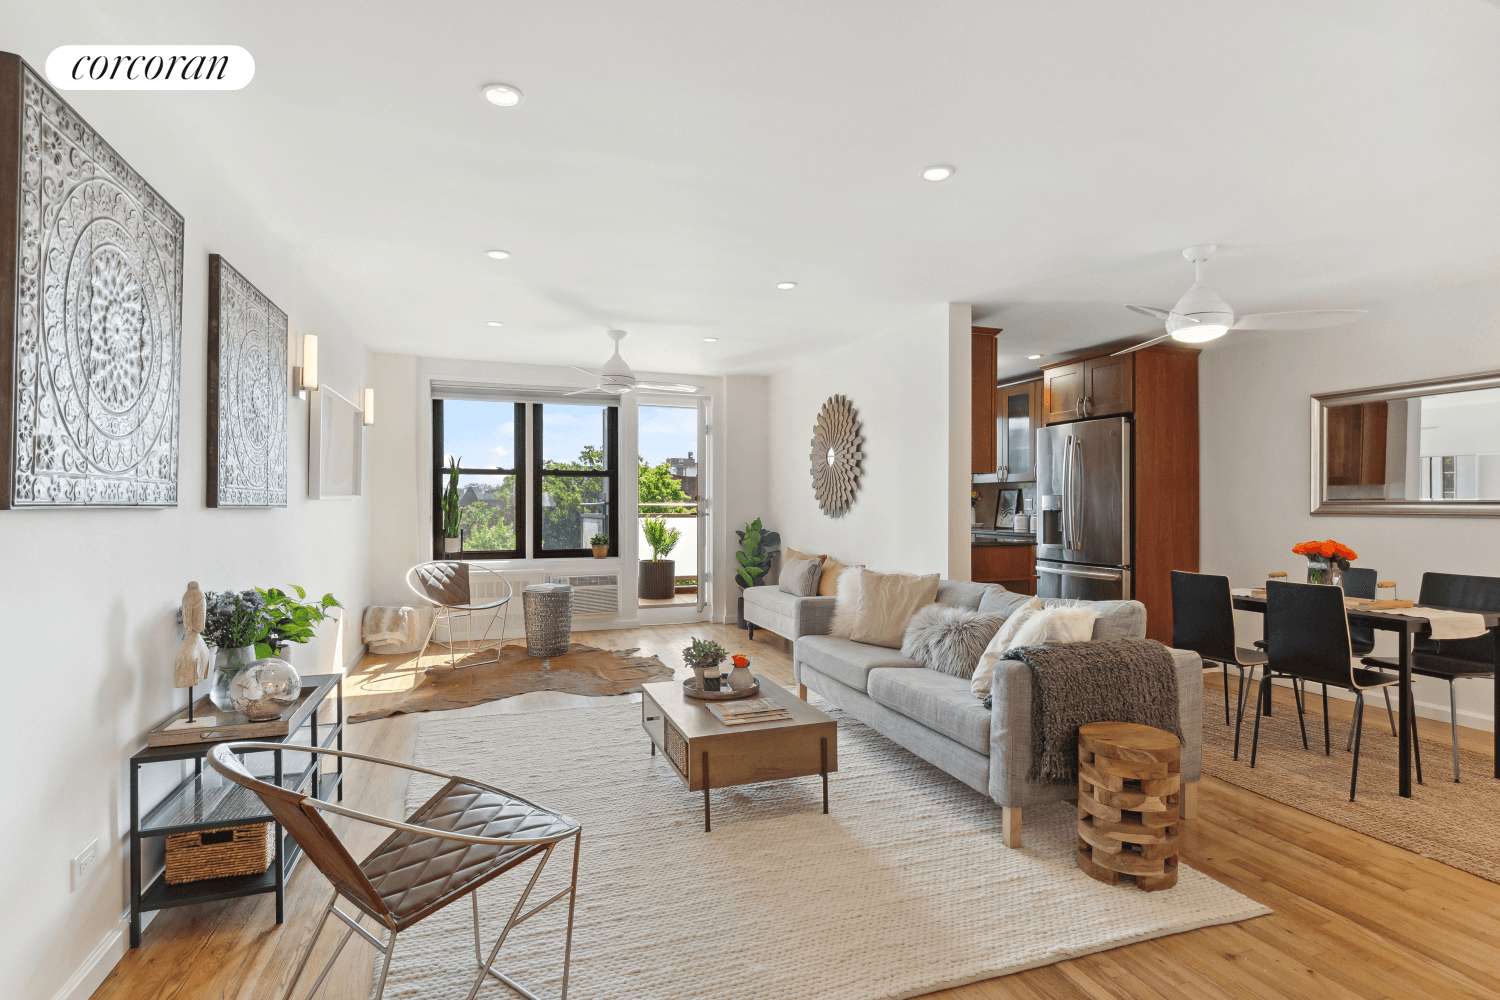 Apartment 4B at 350 Ocean Parkway Offers So Much Space, GORGEOUS VIEWS from EVERY ROOM, and Your Own Highly Coveted, PRIVATE TERRACE !